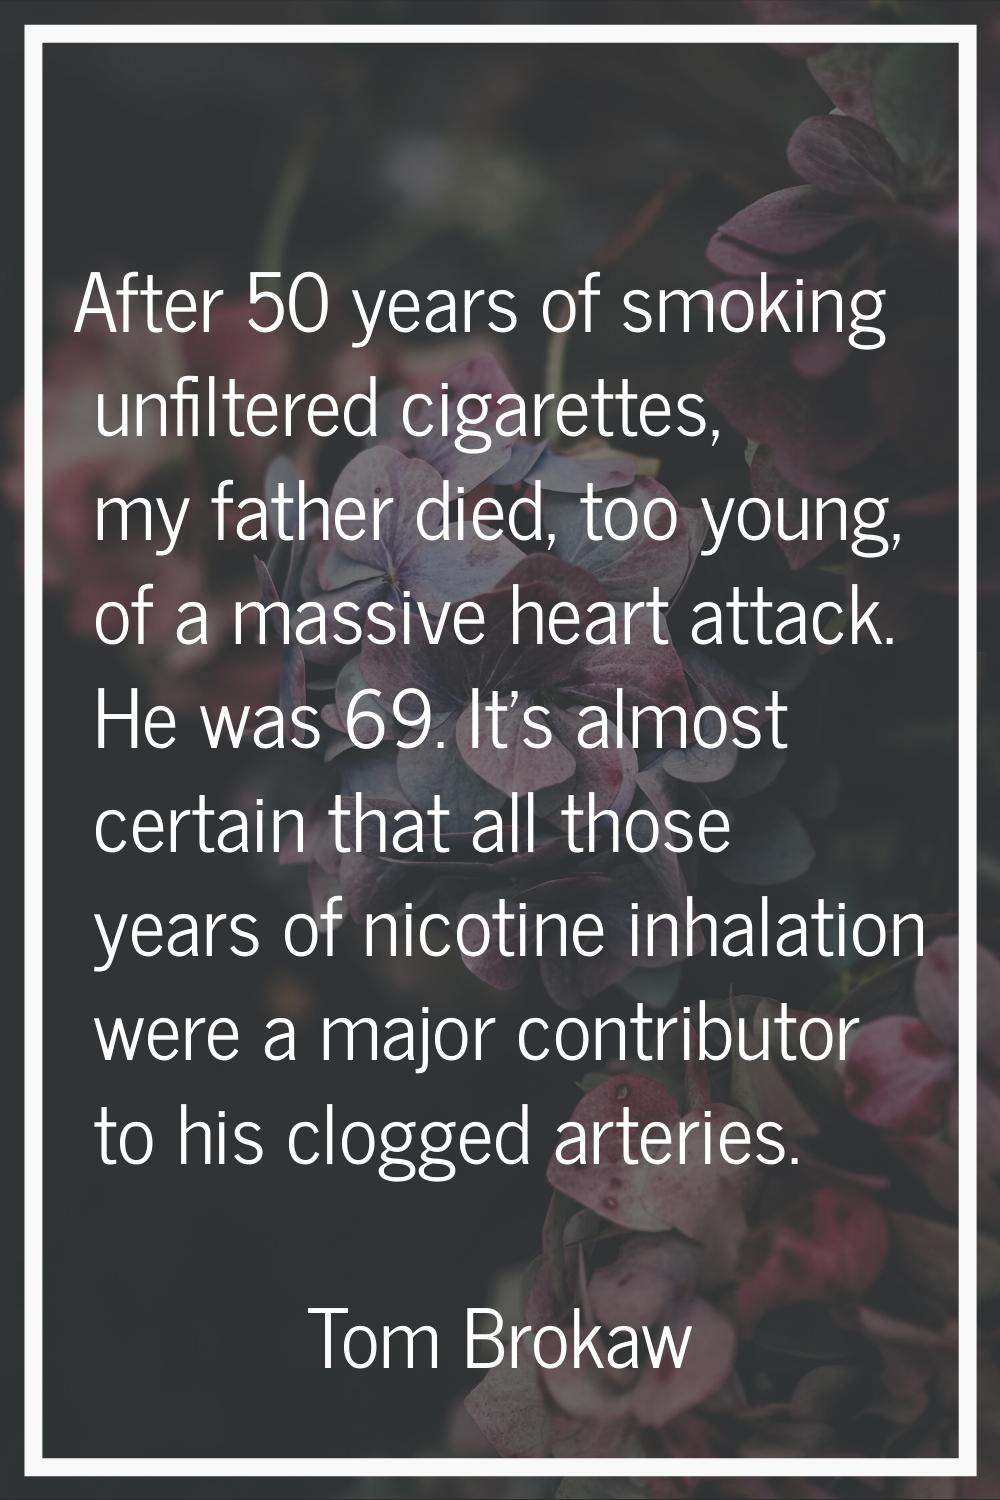 After 50 years of smoking unfiltered cigarettes, my father died, too young, of a massive heart atta